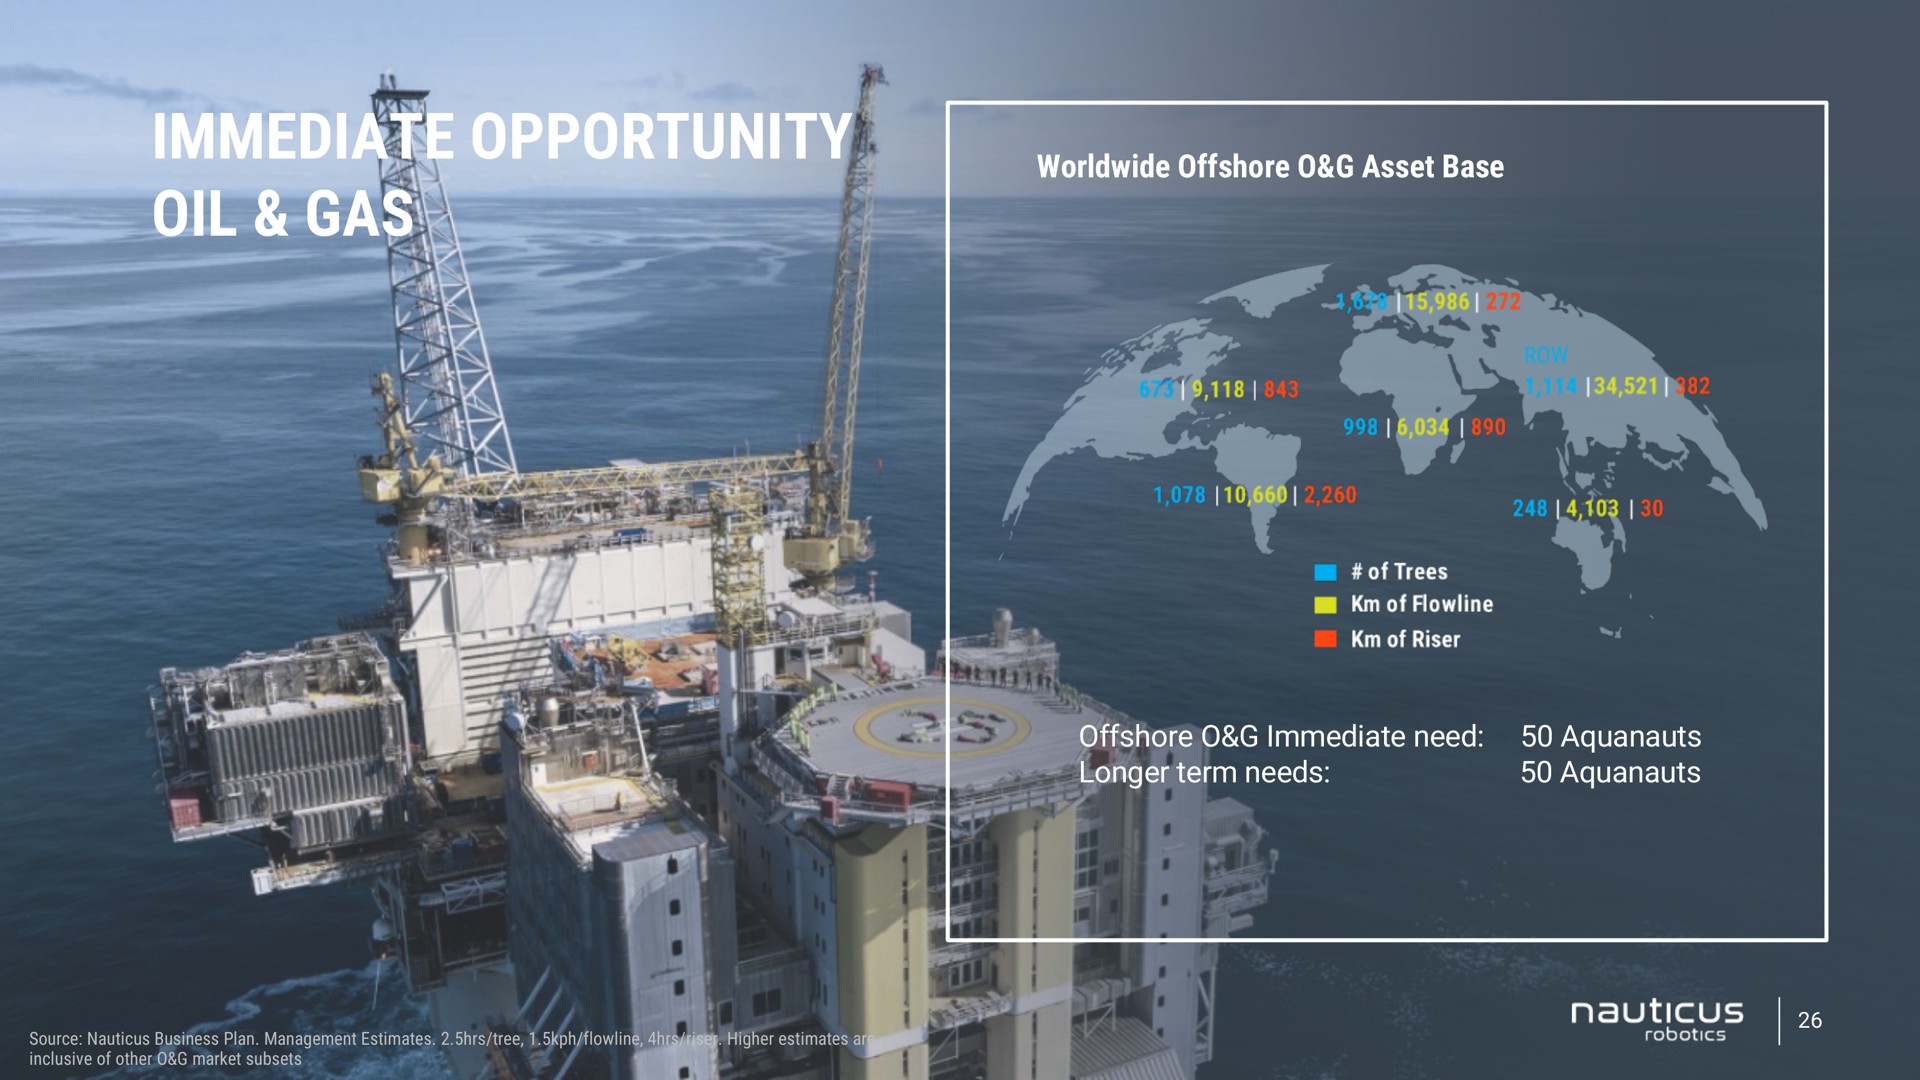 immediate opportunity oil gas offshore asset base offshore immediate need longer term needs | Nauticus